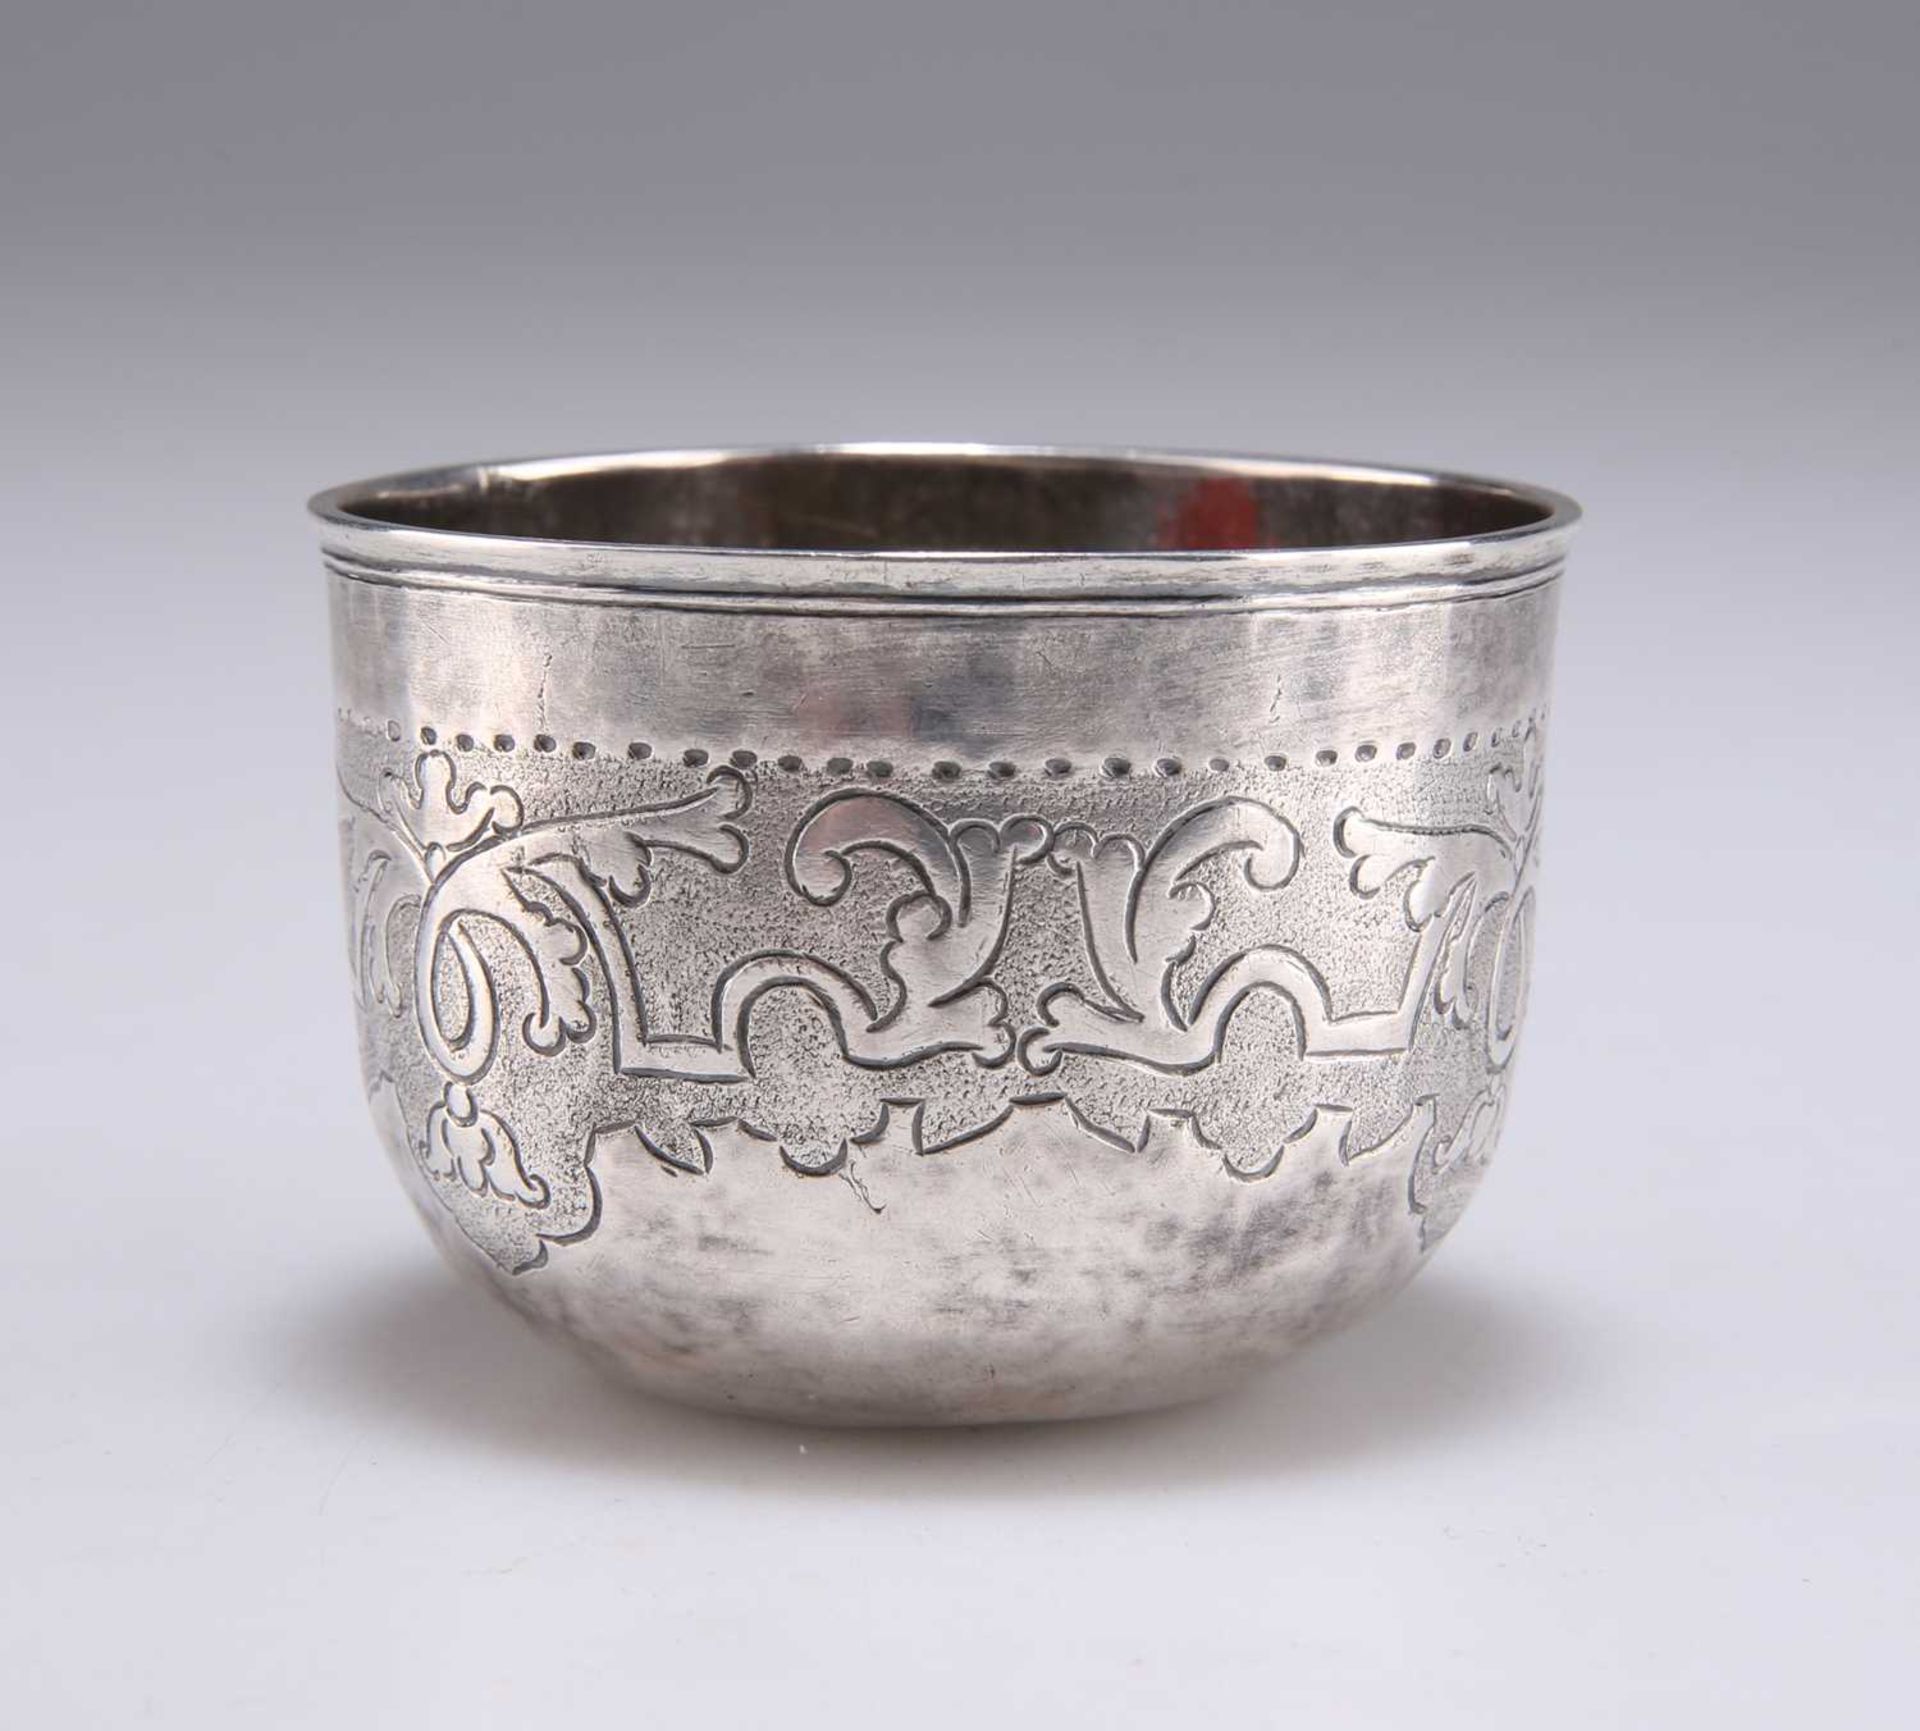 AN 18TH CENTURY RUSSIAN SILVER TUMBLER CUP